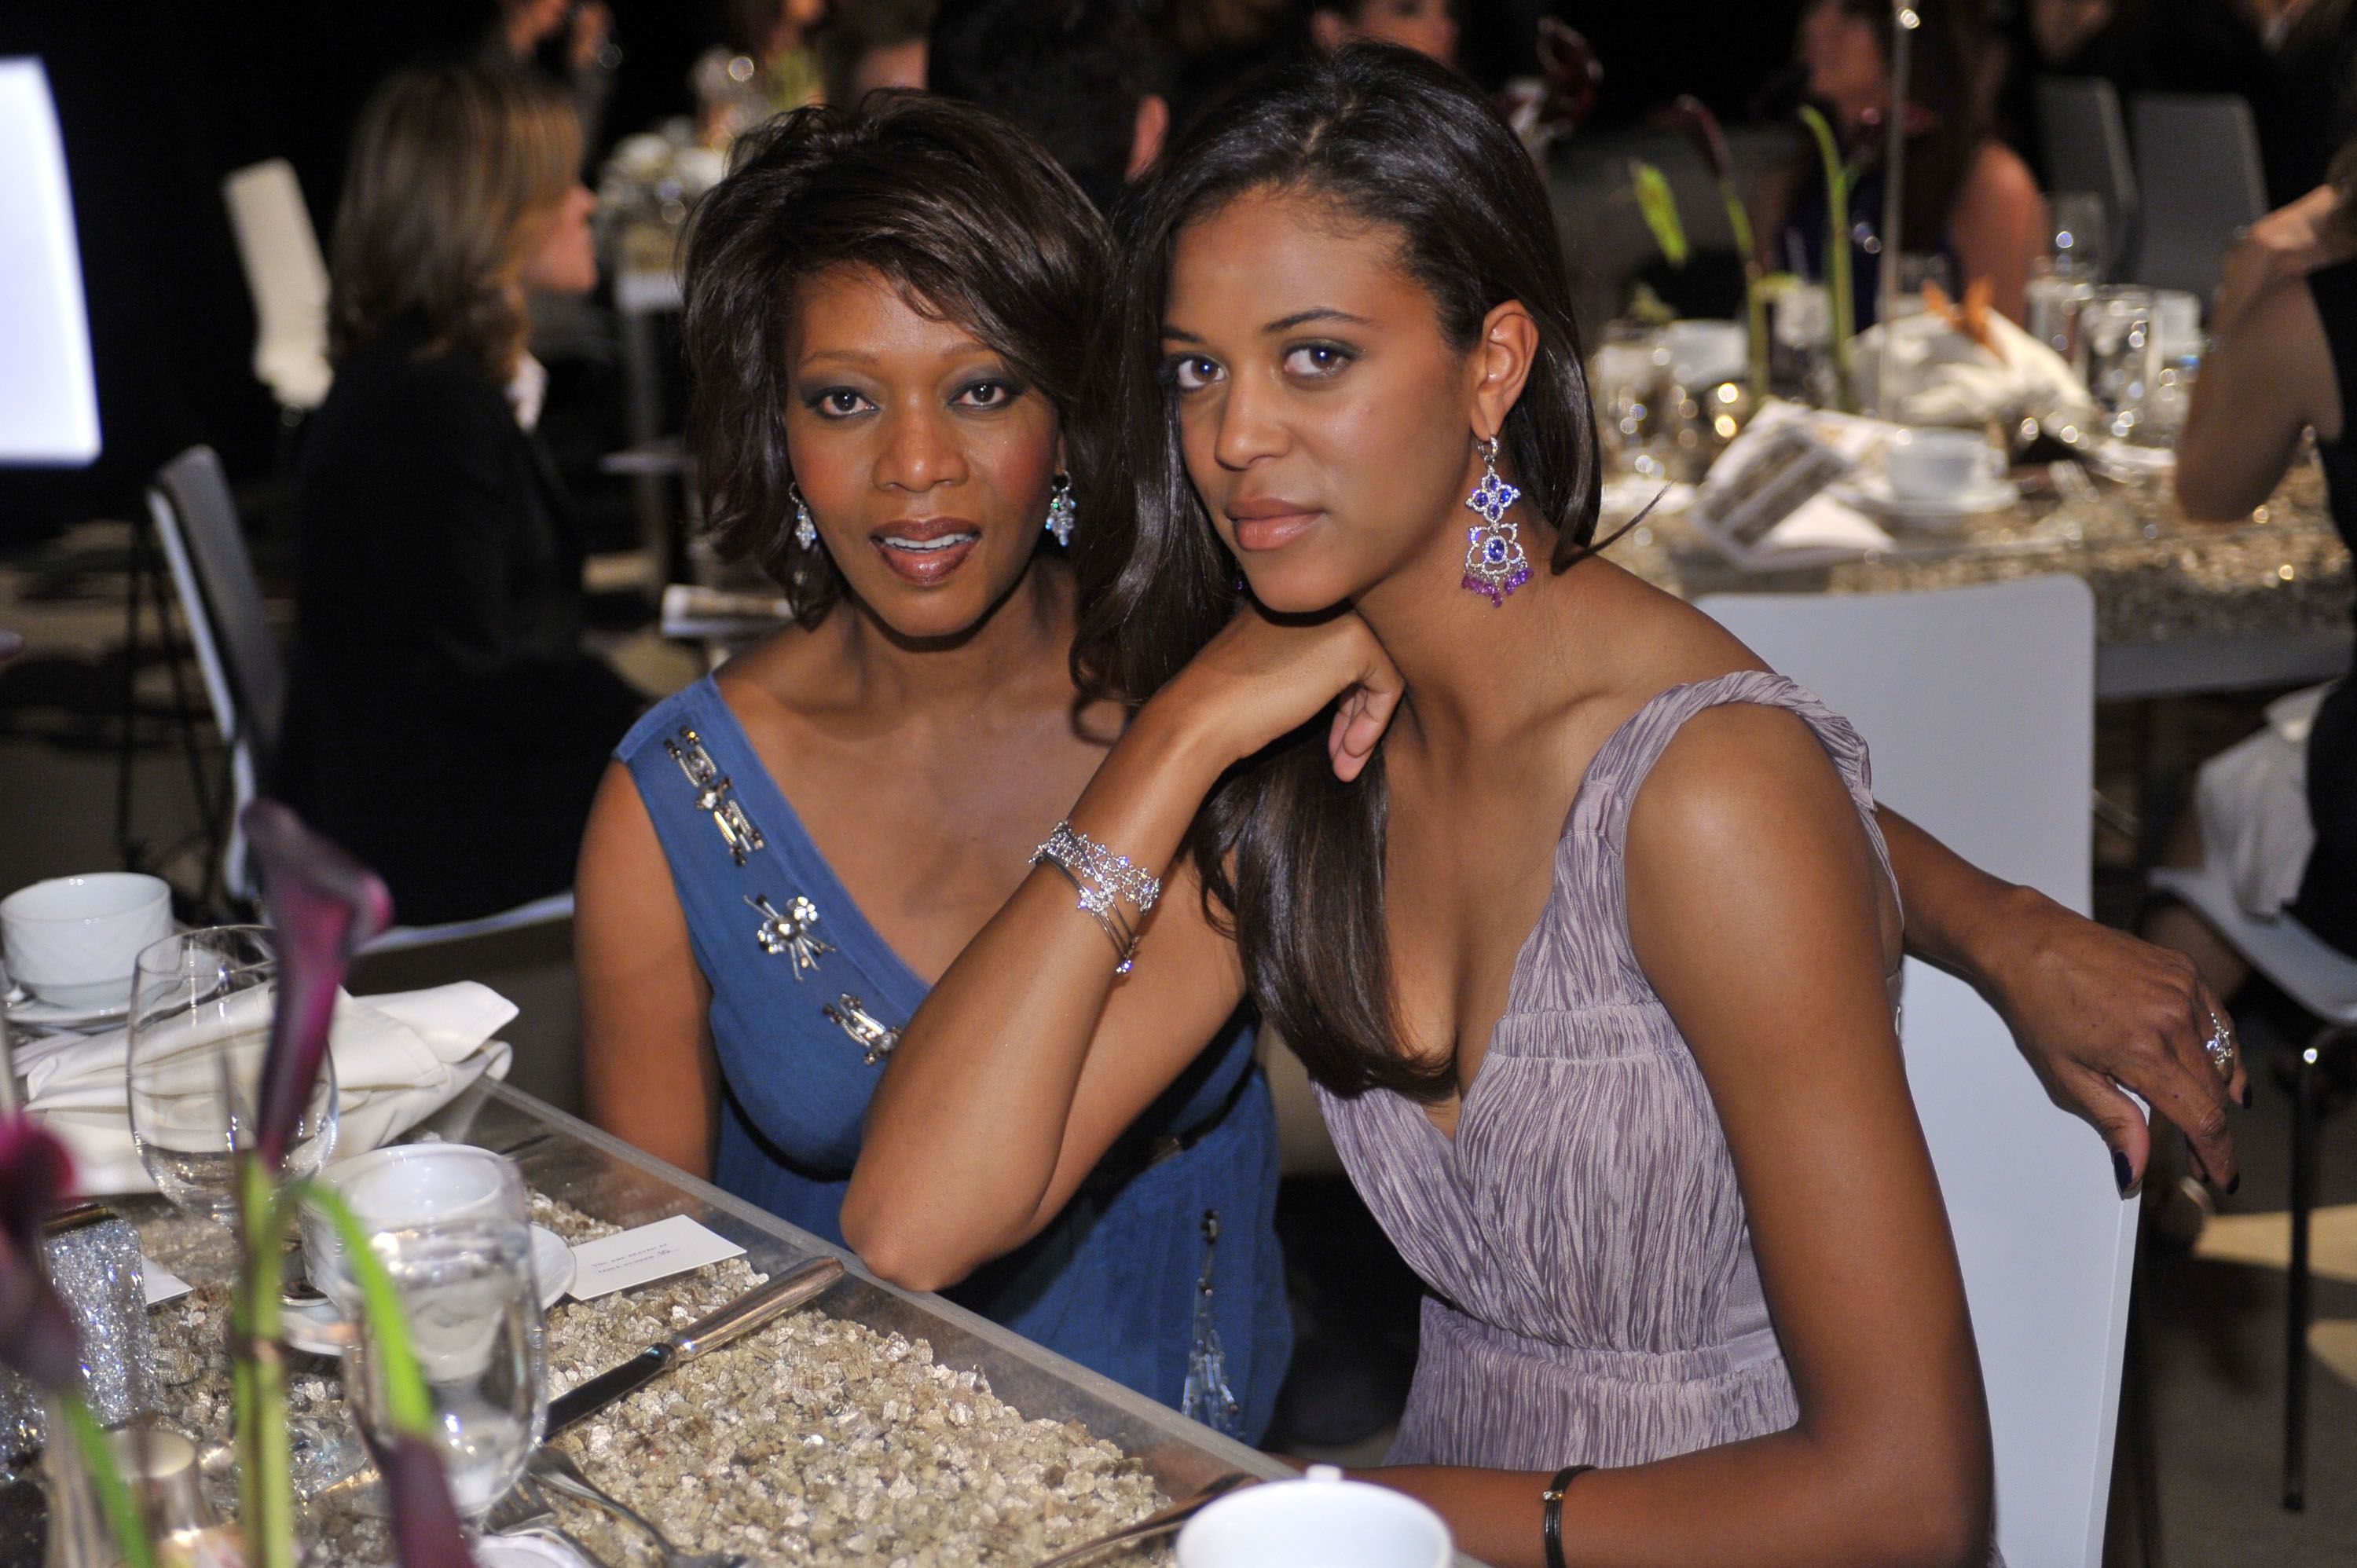 Alfre Woodard and Mavis Spencer at the 9th Annual Awards Season Diamond Fashion Show in 2010 in Holywood | Source: Getty Images